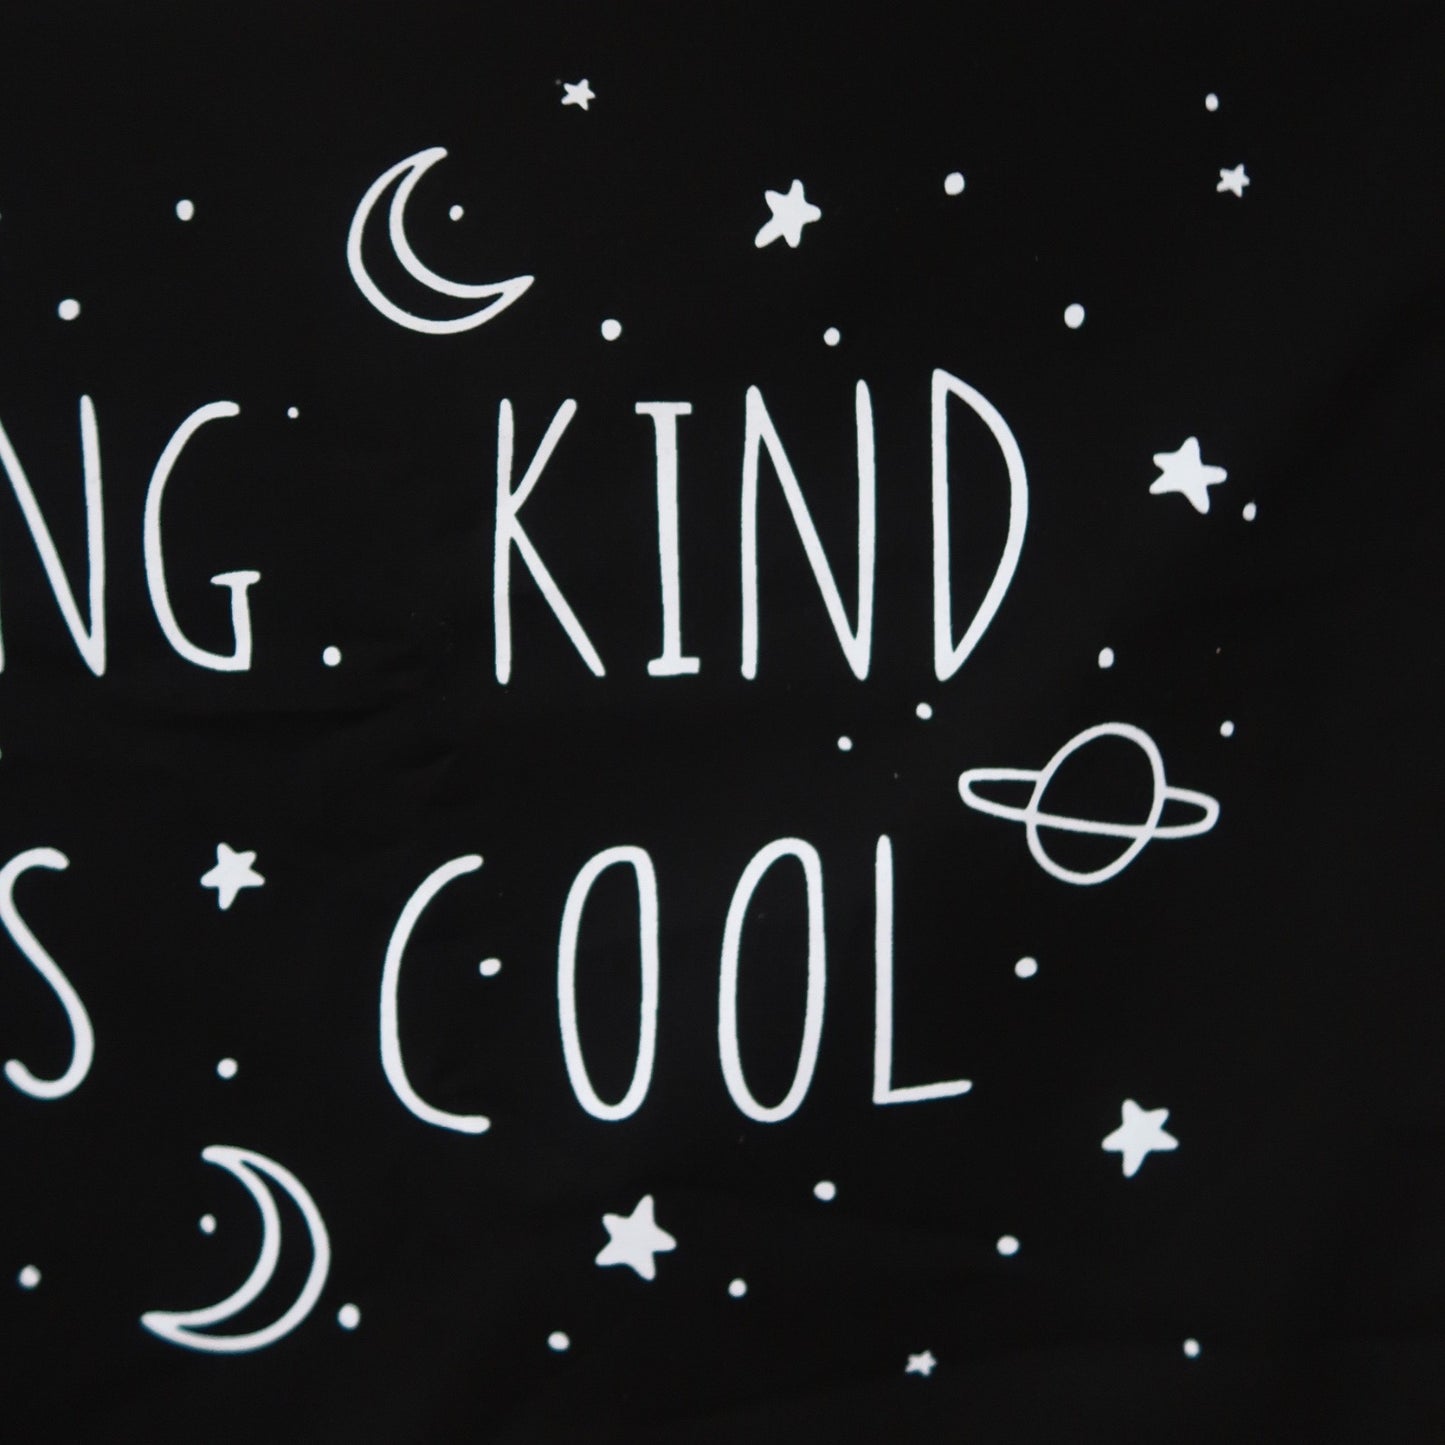 being kind is cool horizontal wall hanging - black